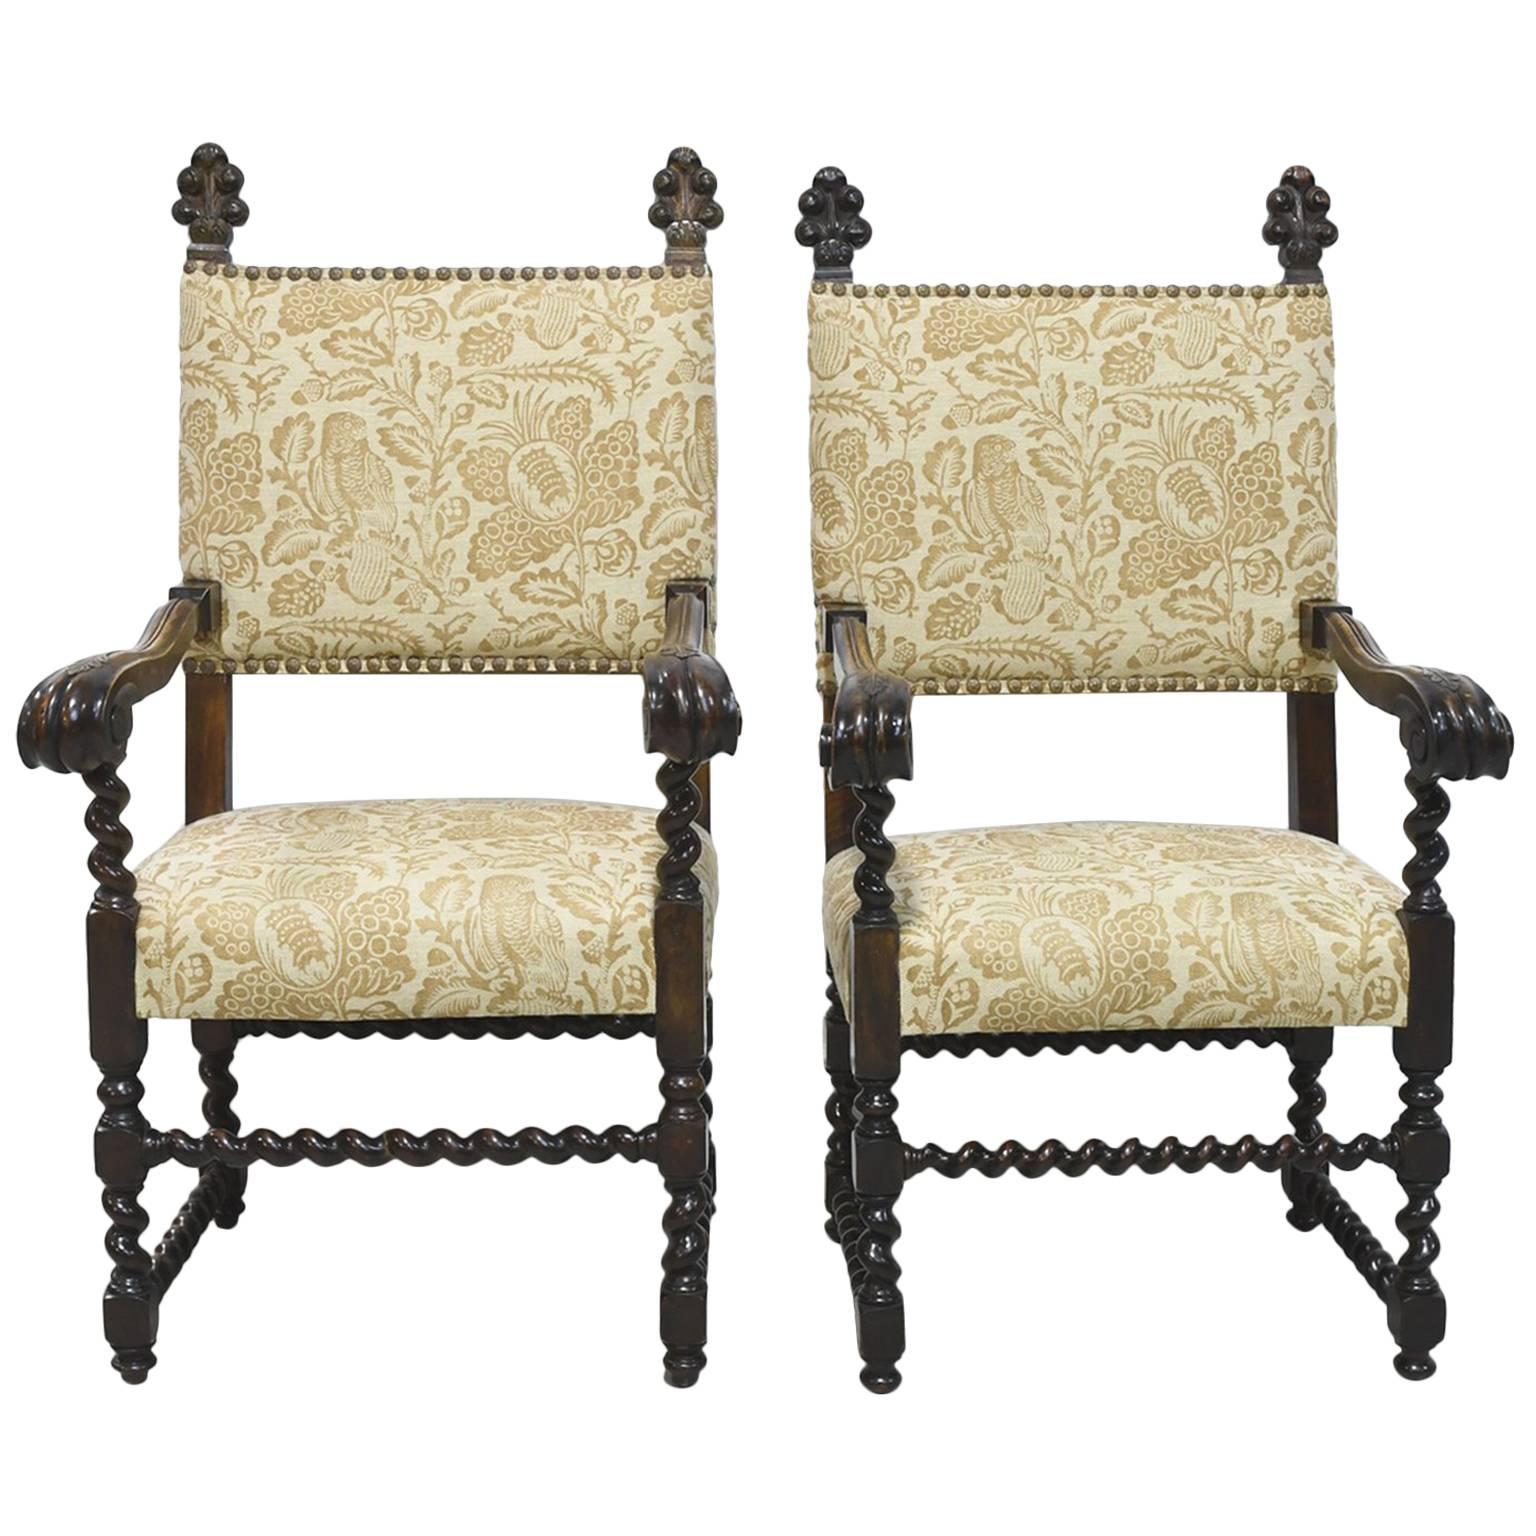 Pair of 19th Century Jacobean Style Throne Chairs with Carved Royal Plumes